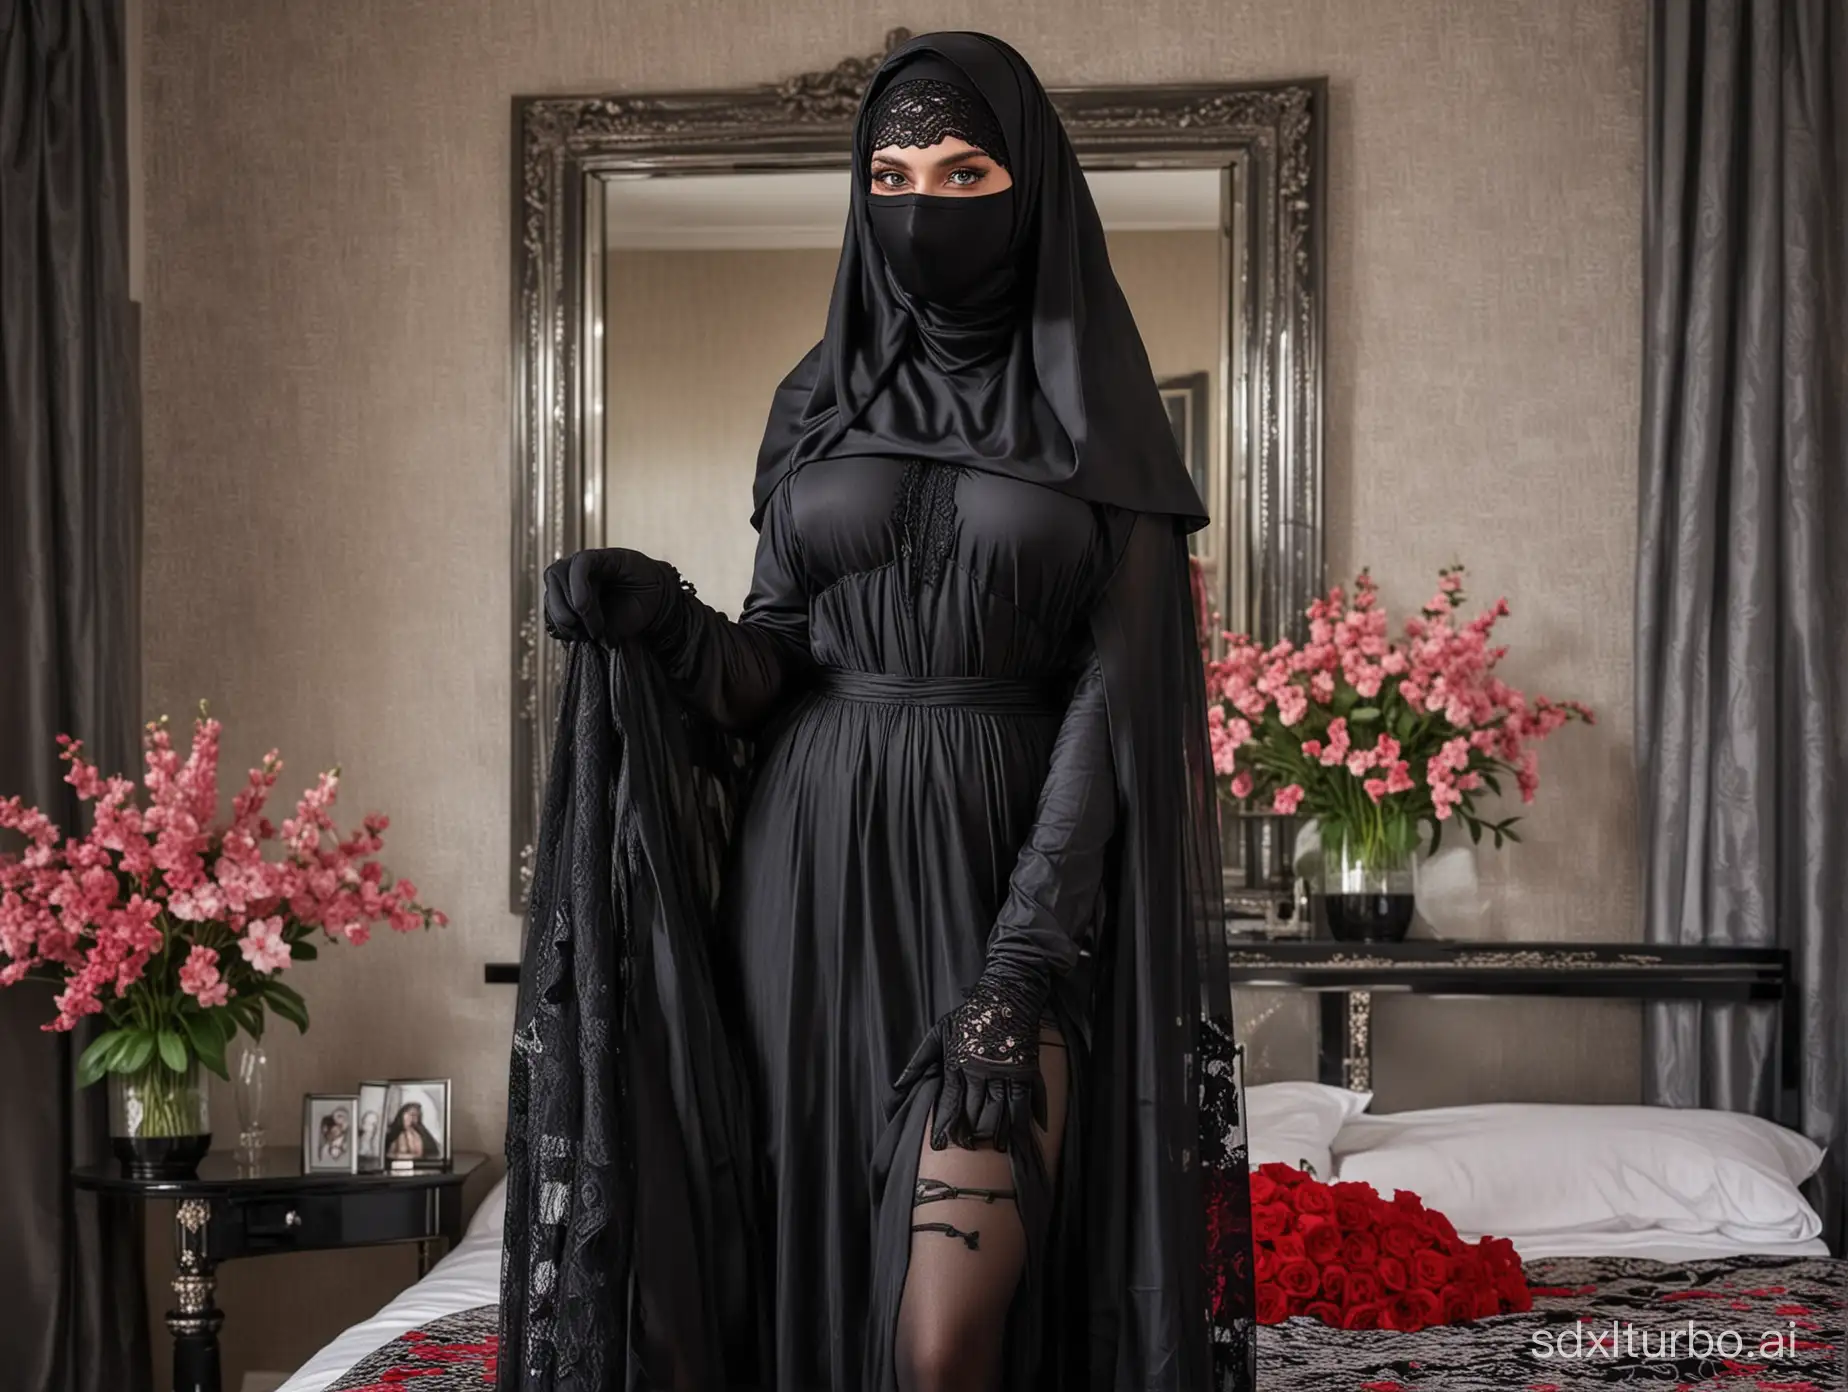 Feminized sissy man standing from behind, small breasts, Personality erased and encased in a long fully grey burqa, blue eyes, complete black hijab with mask on mouth, sprig of jasmine on ear, transparent lace veil mask on eyes, black stockings, high-heeled shoes.
Black gloves.
Luxury room with red satin bed.
Mirror in the background.